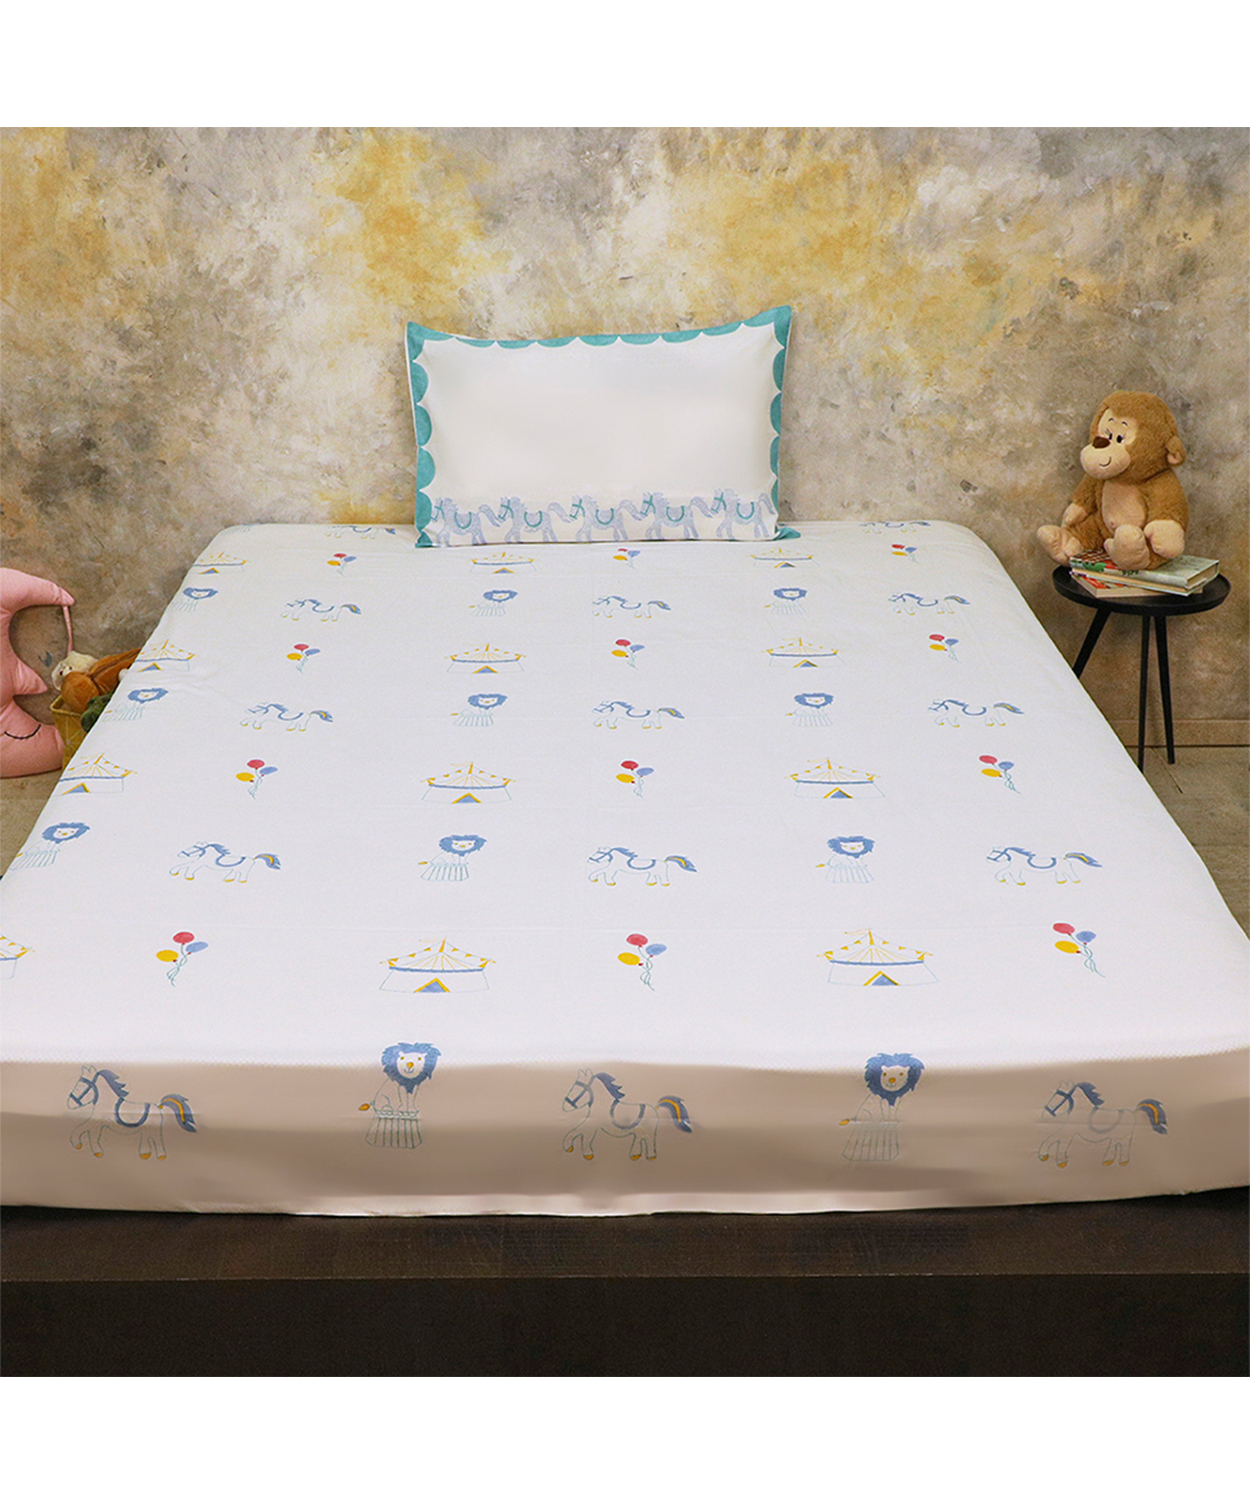 Bed Set- I am going to the circus - Double Bed - Teal